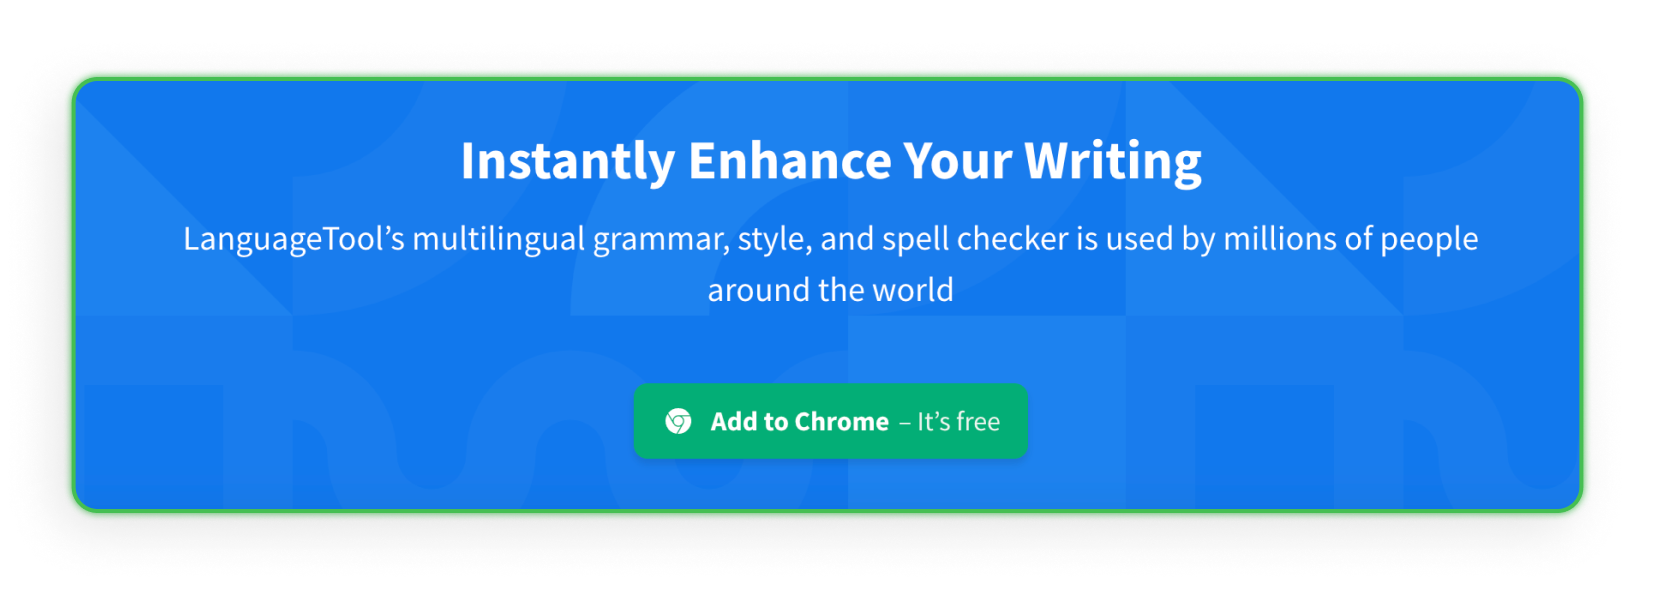 Chrome extension for publishers - Language Tool